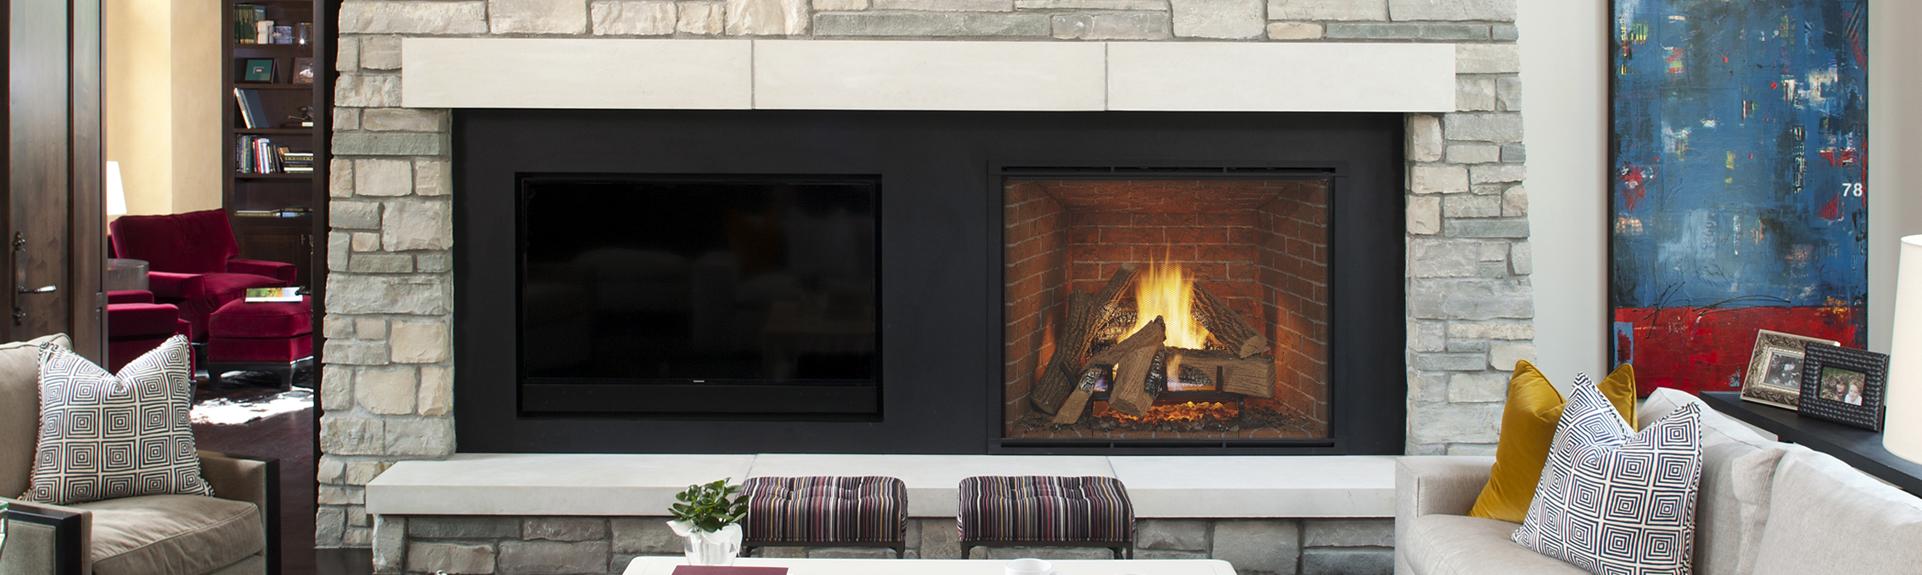 Minuteman International Matte Black Cast Iron Fireplace Insulation in the  Fireplace Accessories department at